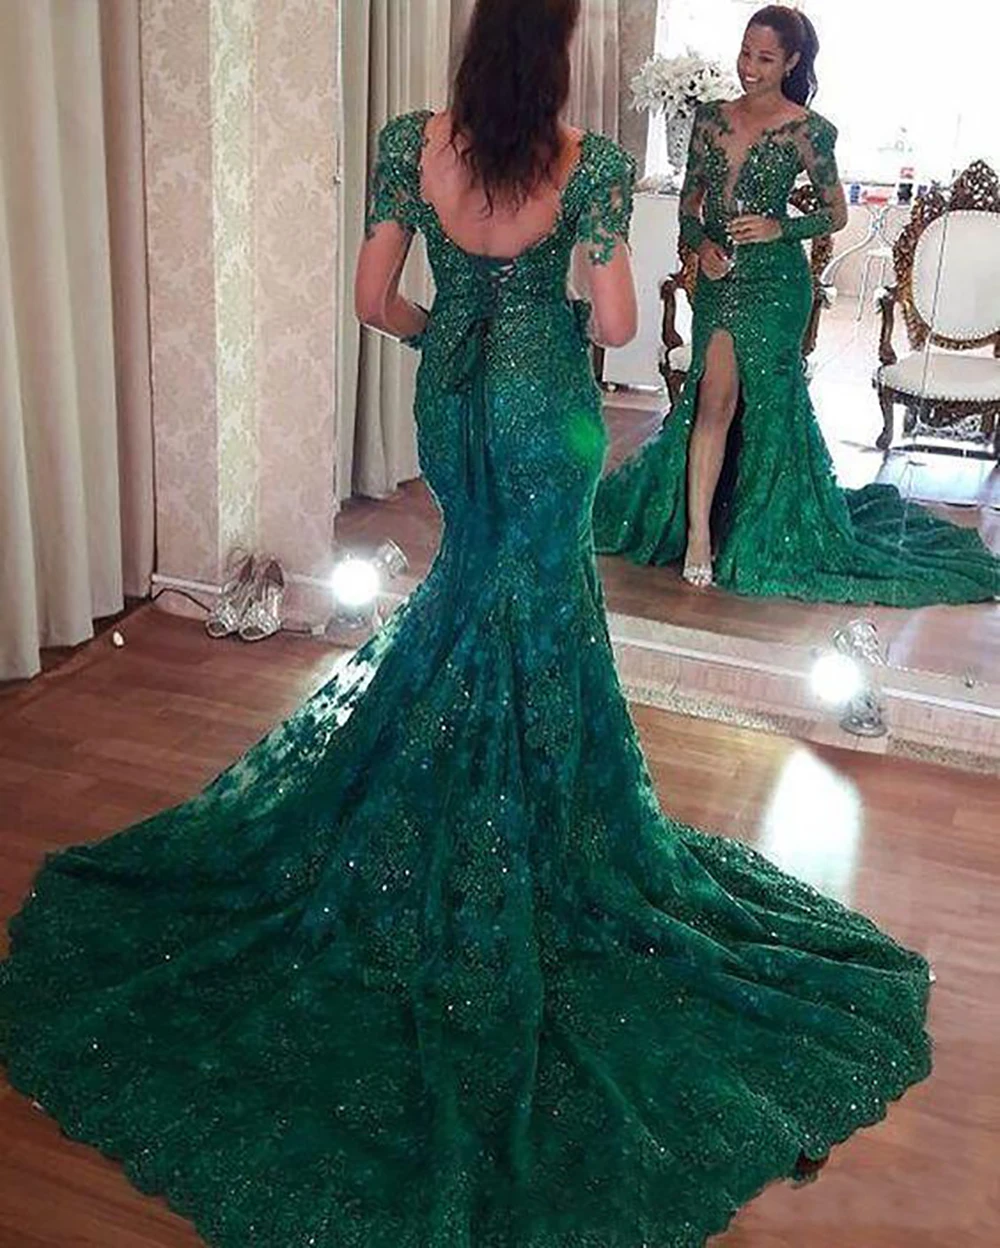 

Trumpet Mermaid Sweep Train Illusion Thigh-High Slits O-Neck Long Sleeve Beaded Evening Dress Prom Party Gown